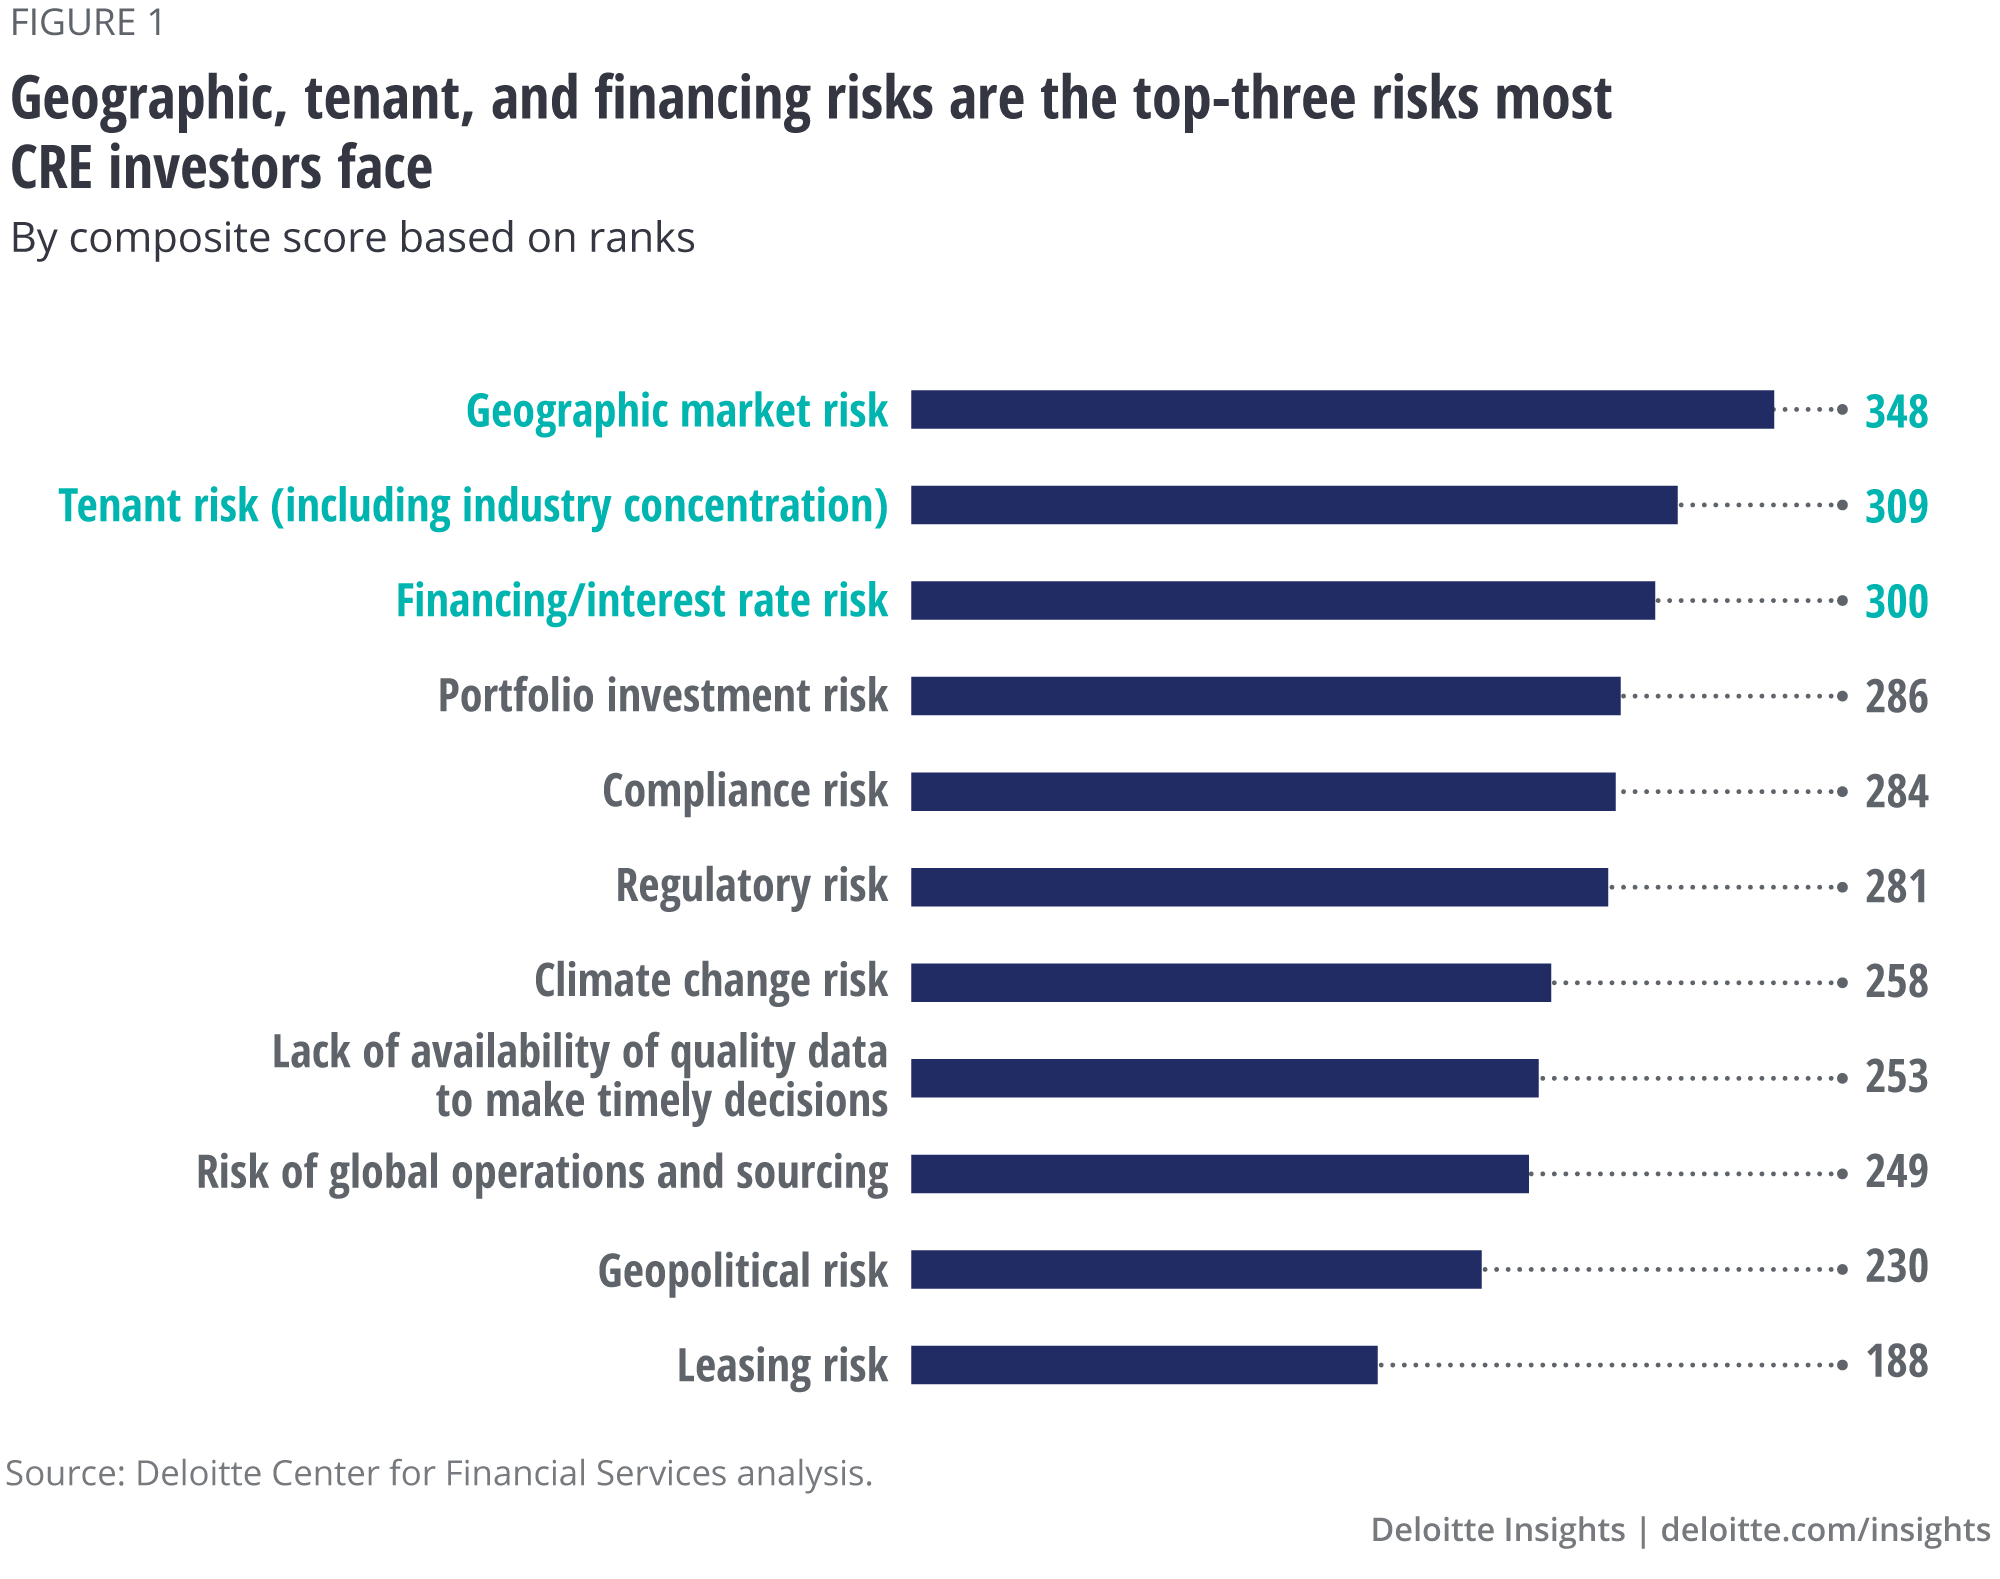 Geographic, tenant, and financing risks are the top-three risks most CRE investors face